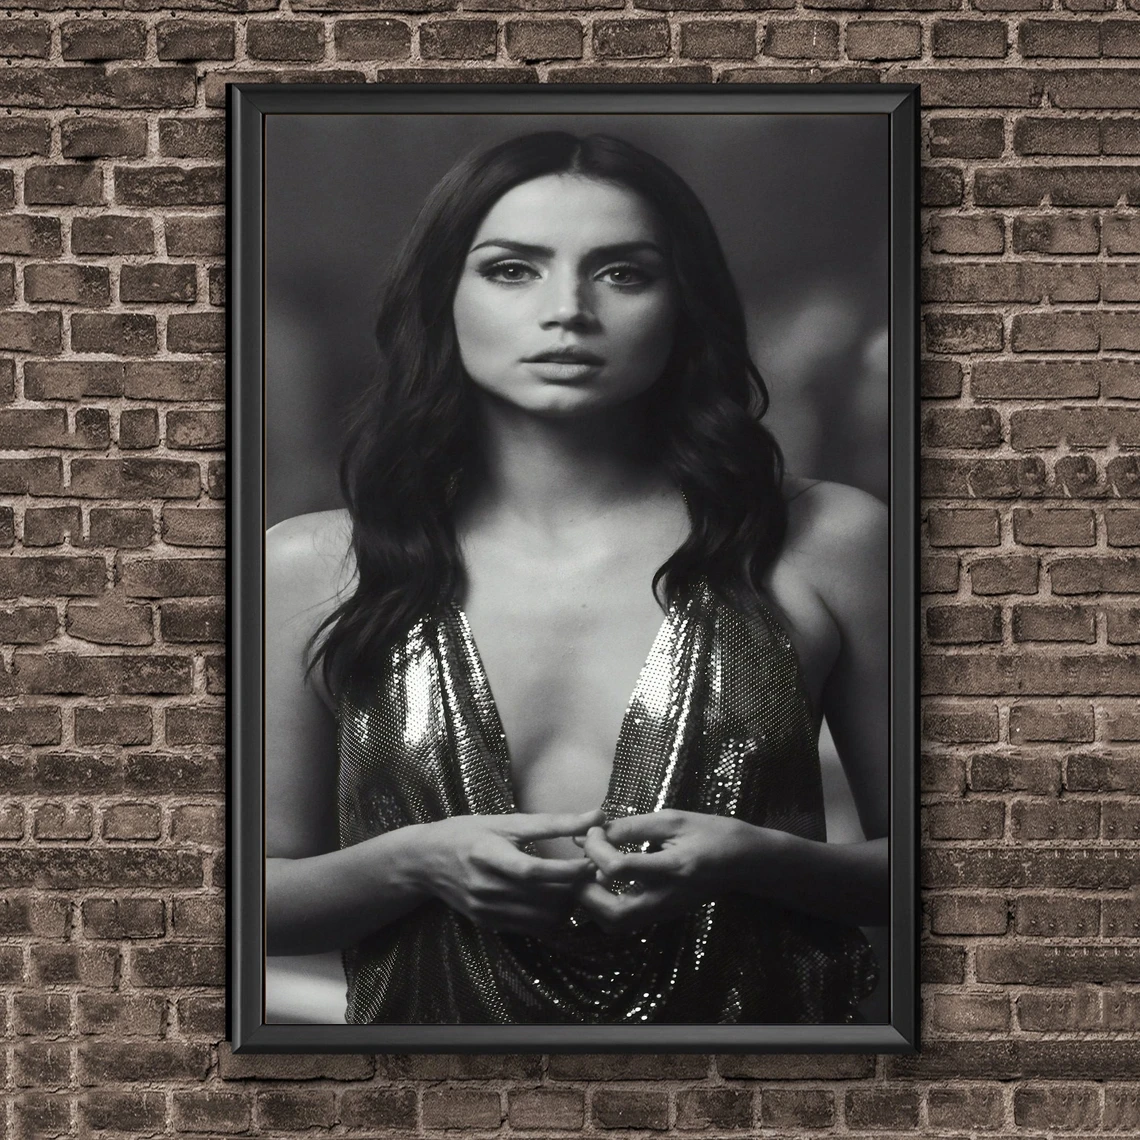  Ana De Armas Poster Sexy Actress (23) Art Poster Canvas  Painting Decor Wall Print Photo Gifts Home Modern Decorative Posters  Framed/Unframed 20x30inch(50x75cm): Posters & Prints